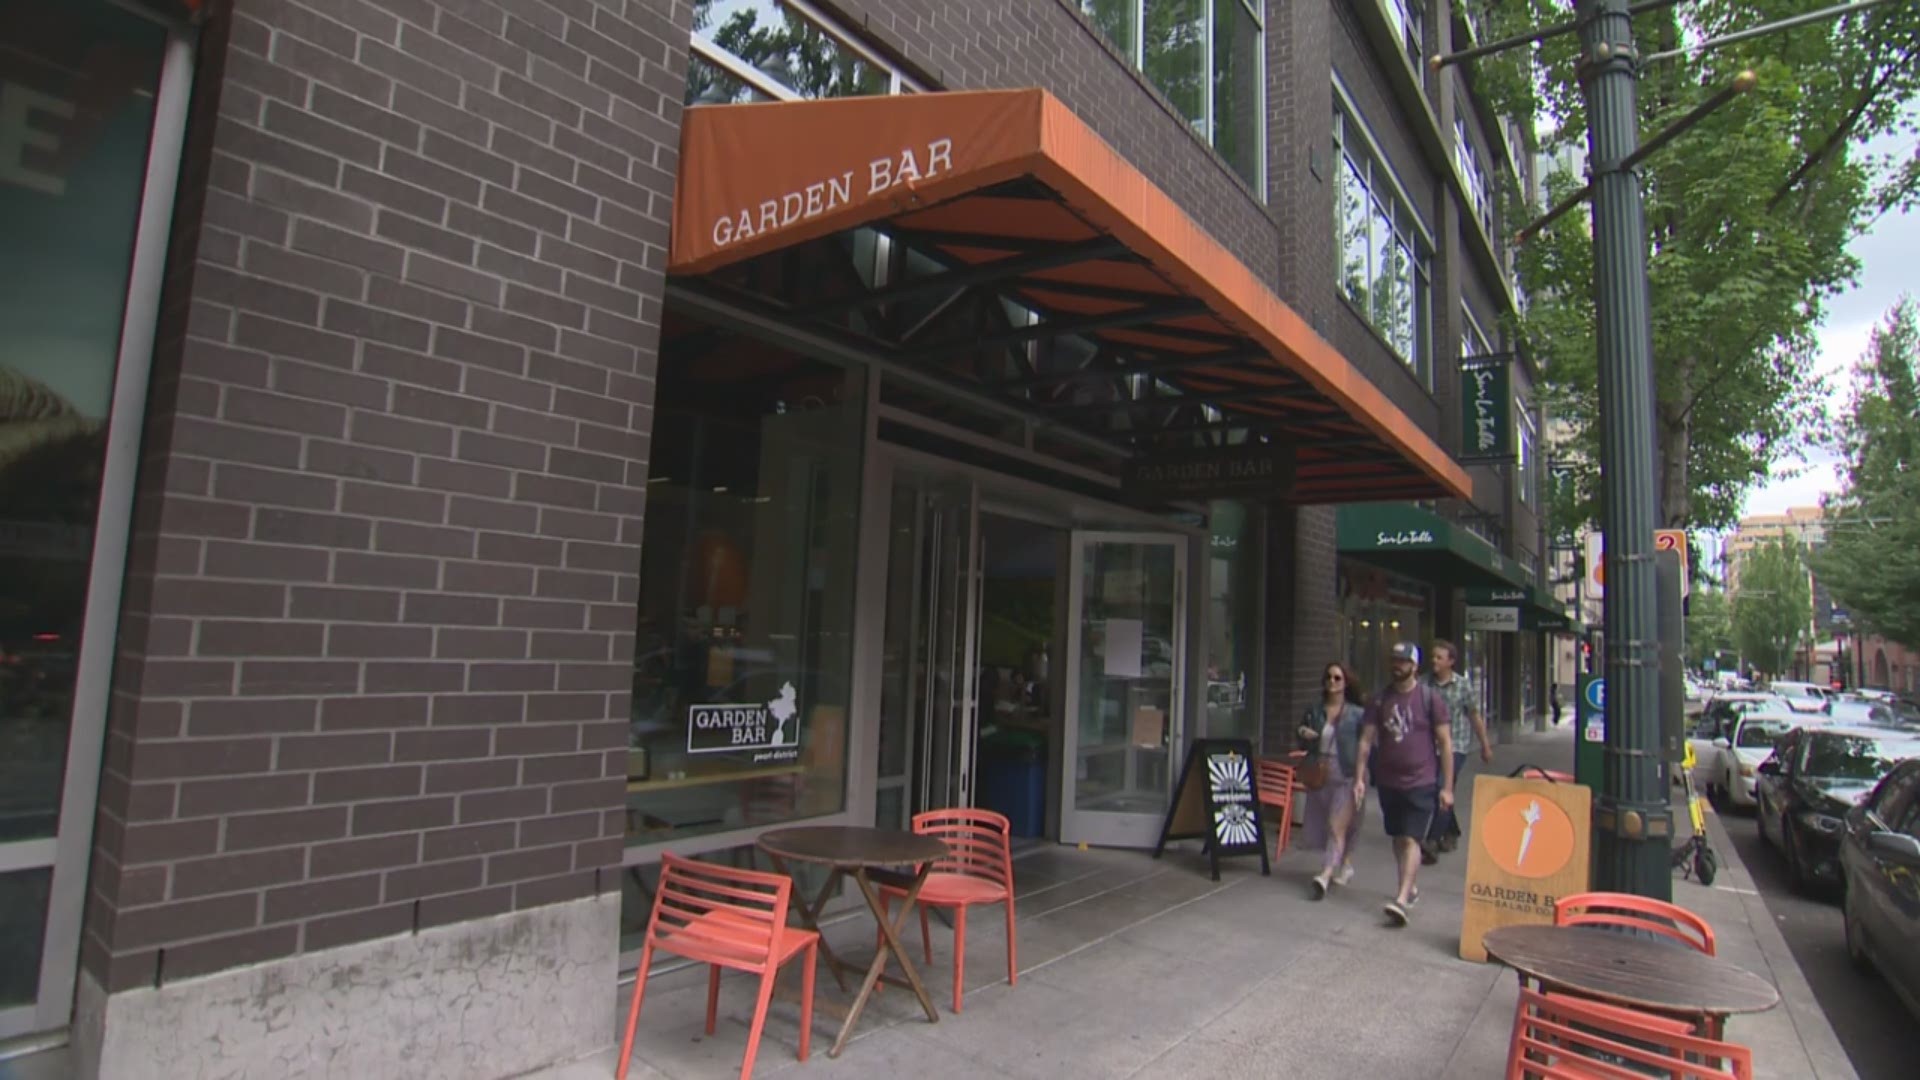 In the next installment of KGW reporter Pat Dooris' series on Oregonians who are making a difference in the community, he profiles a Portland businesswoman who has turned her lifelong love of fresh, healthy foods into a chain of area restaurants.